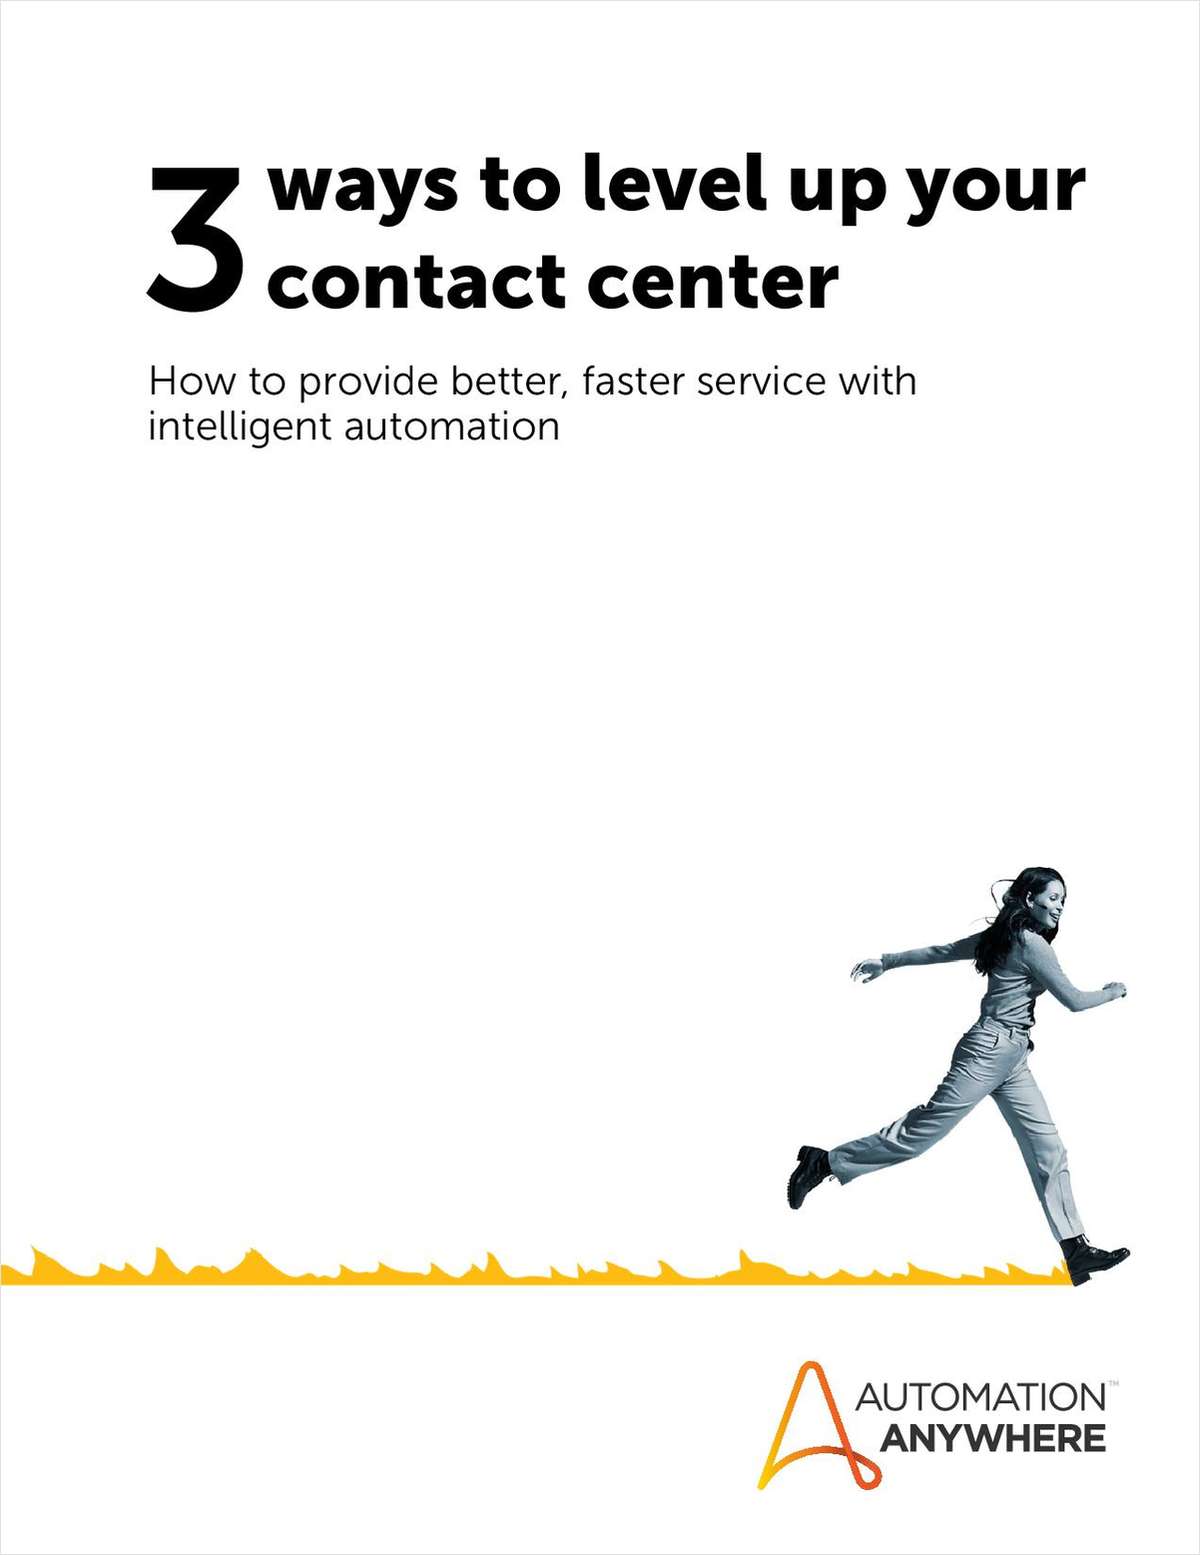 Three ways to level up your contact center